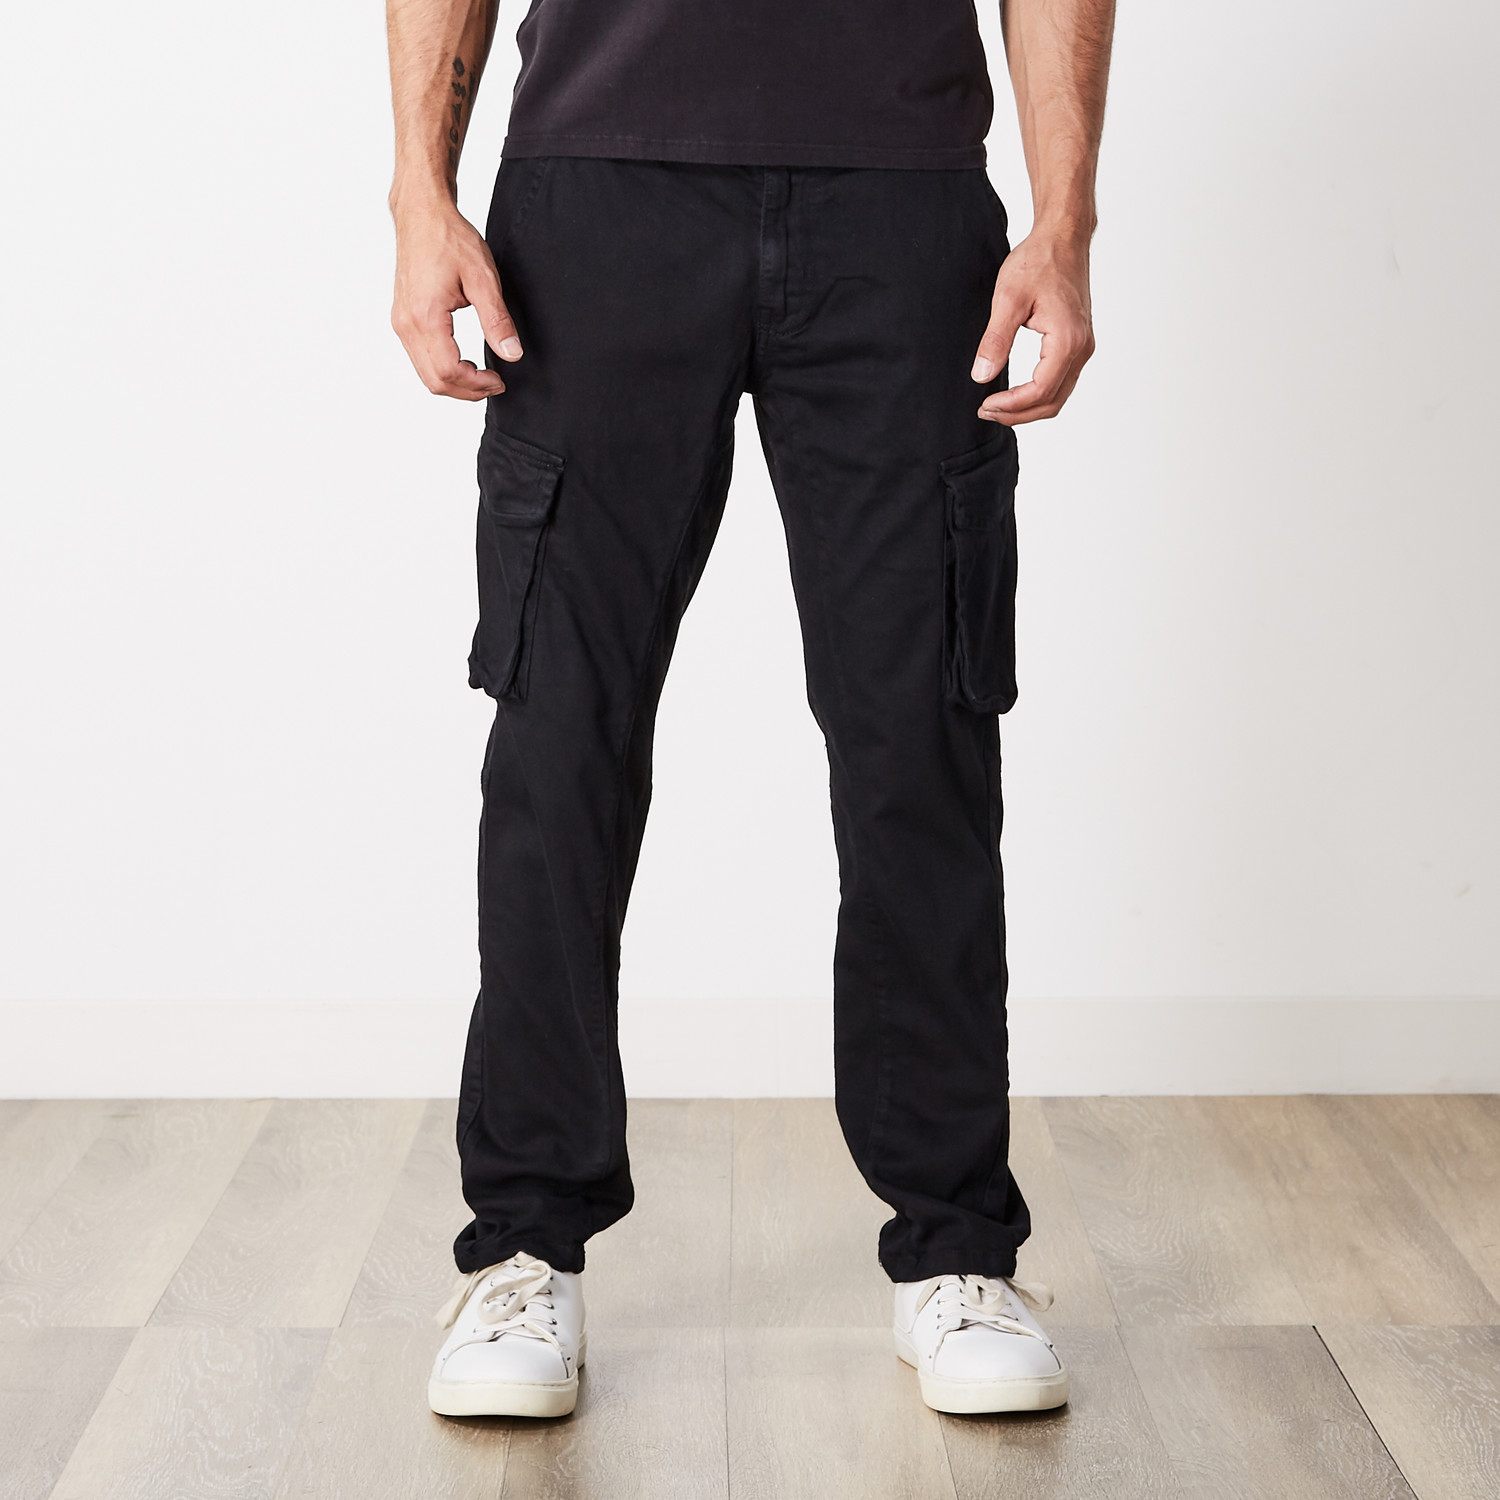 Slim Fit Cargo Pant Black 34wx31l Xray Jeans Touch Of Modern